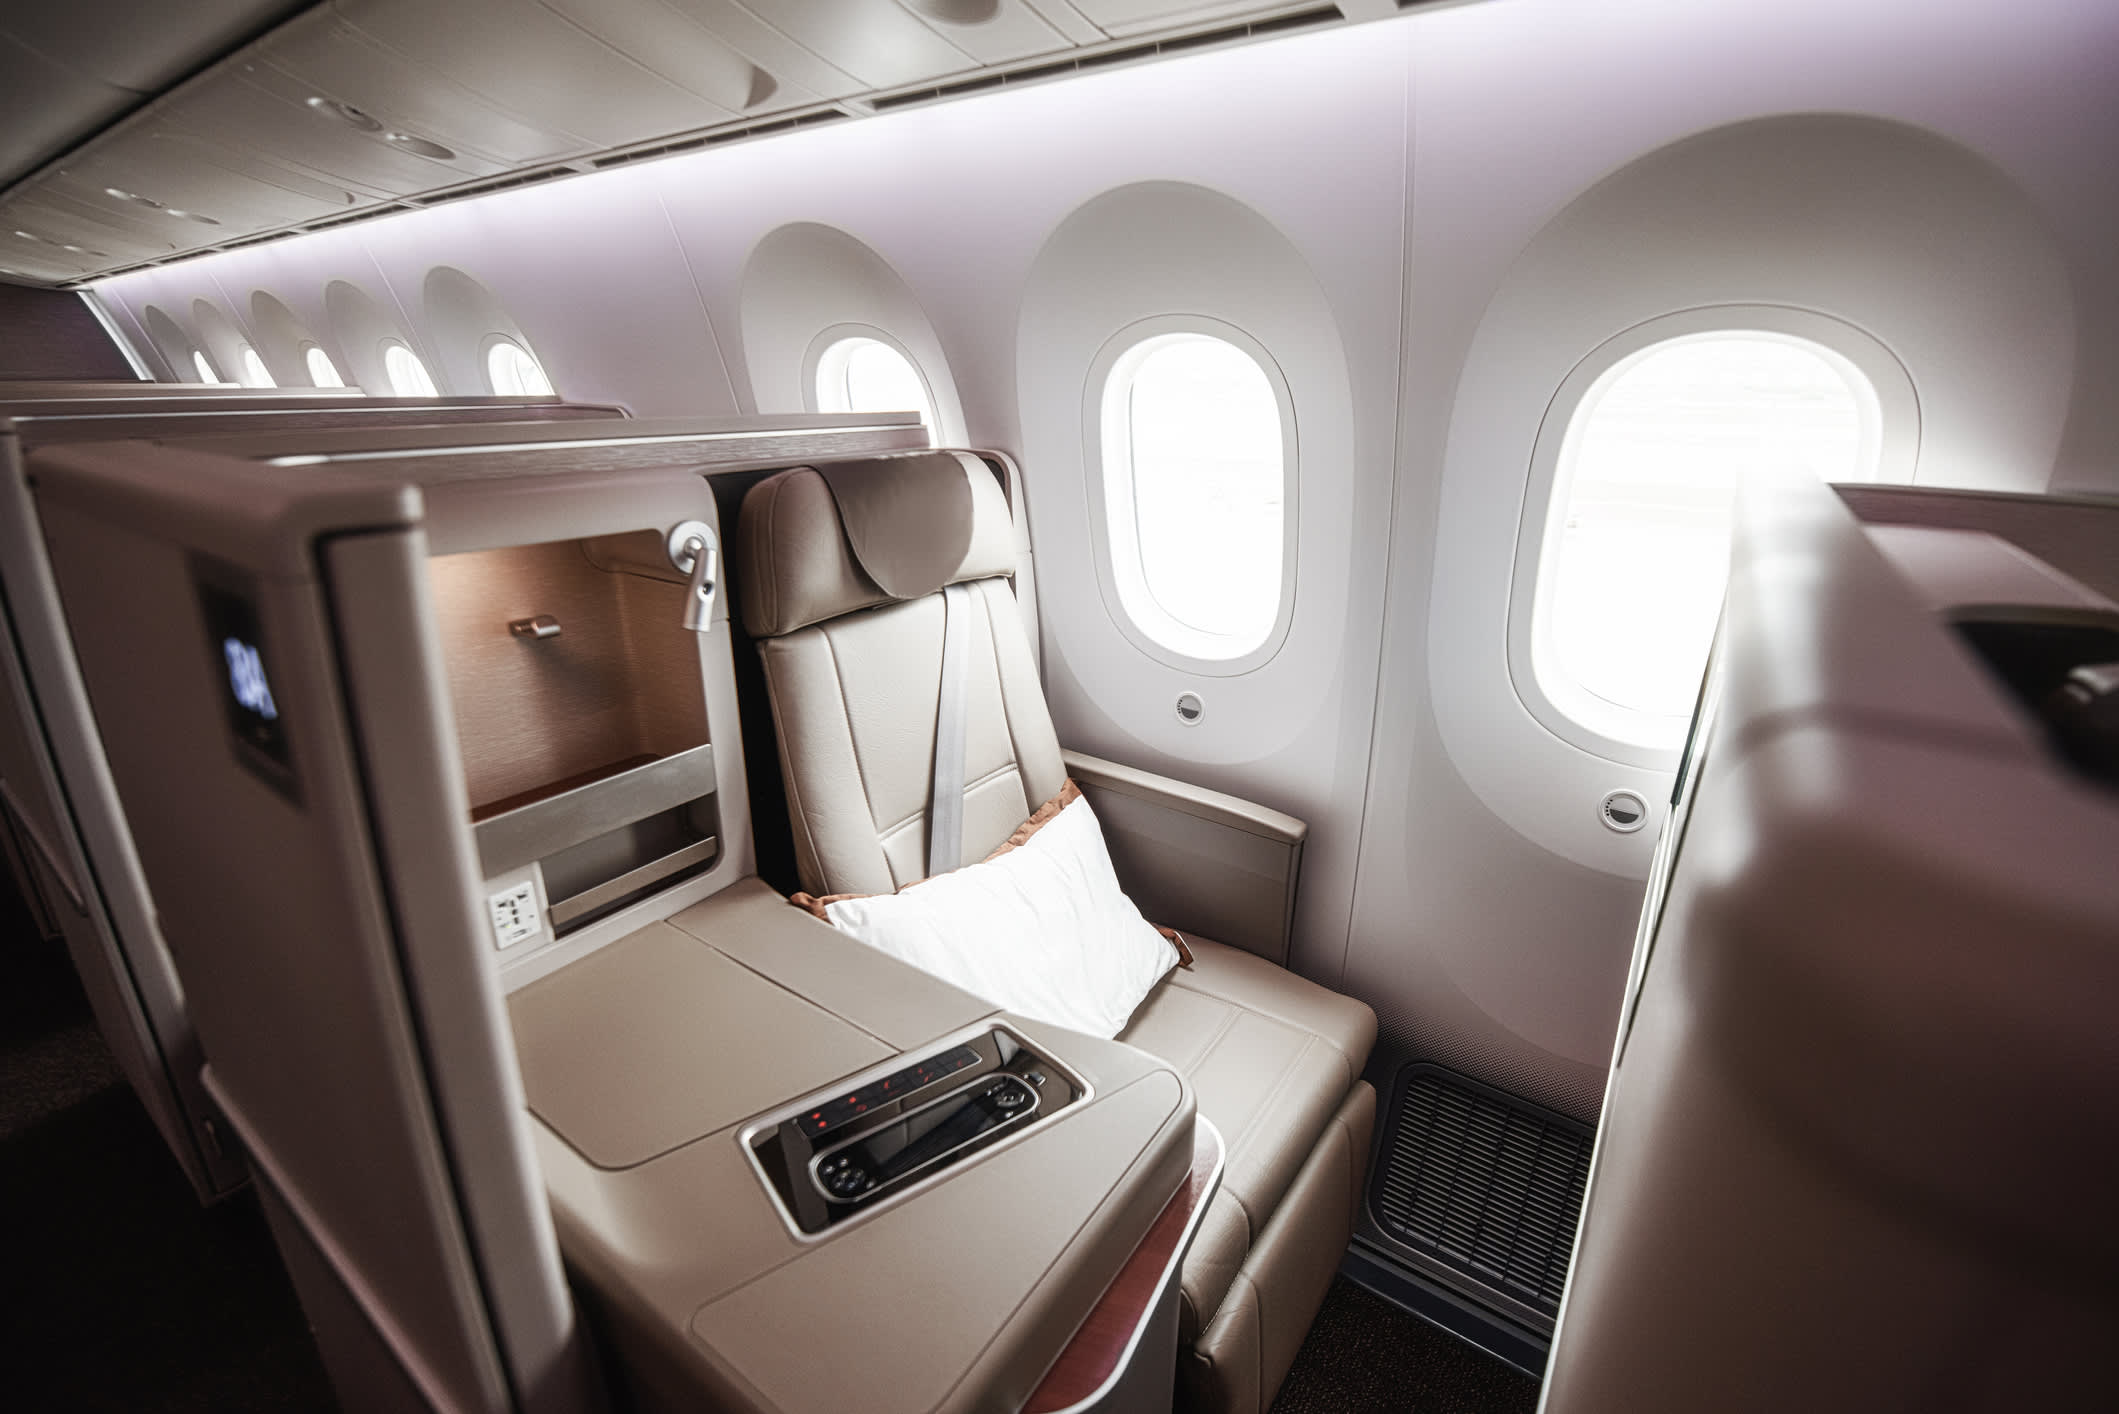 Why airlines are investing millions on bigger and fancier seats